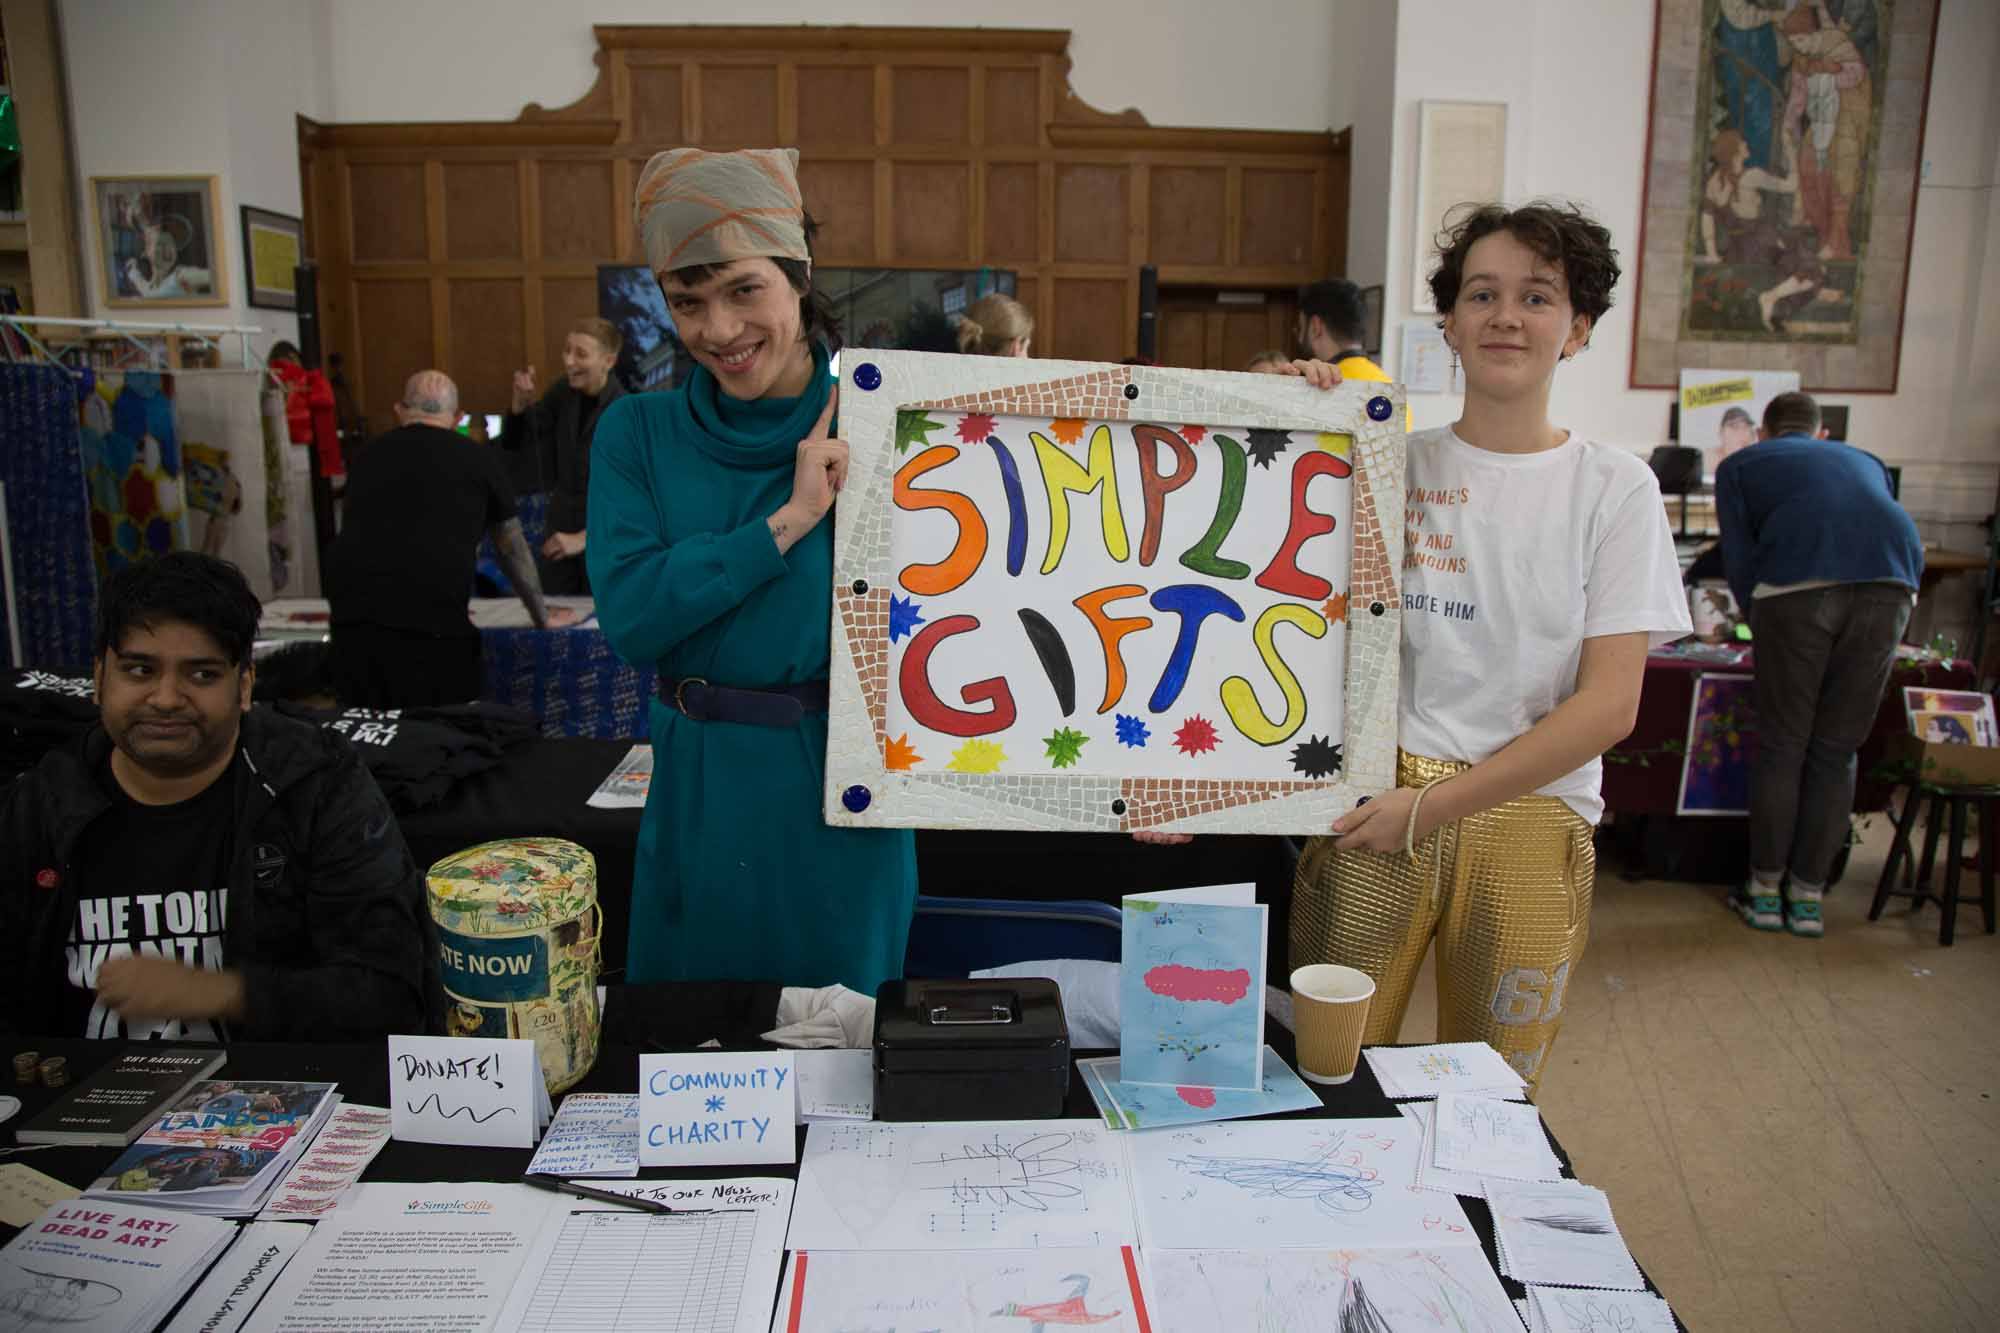 The simple gifts team hold a sign reading 'Simple Gifts' behind their stall.